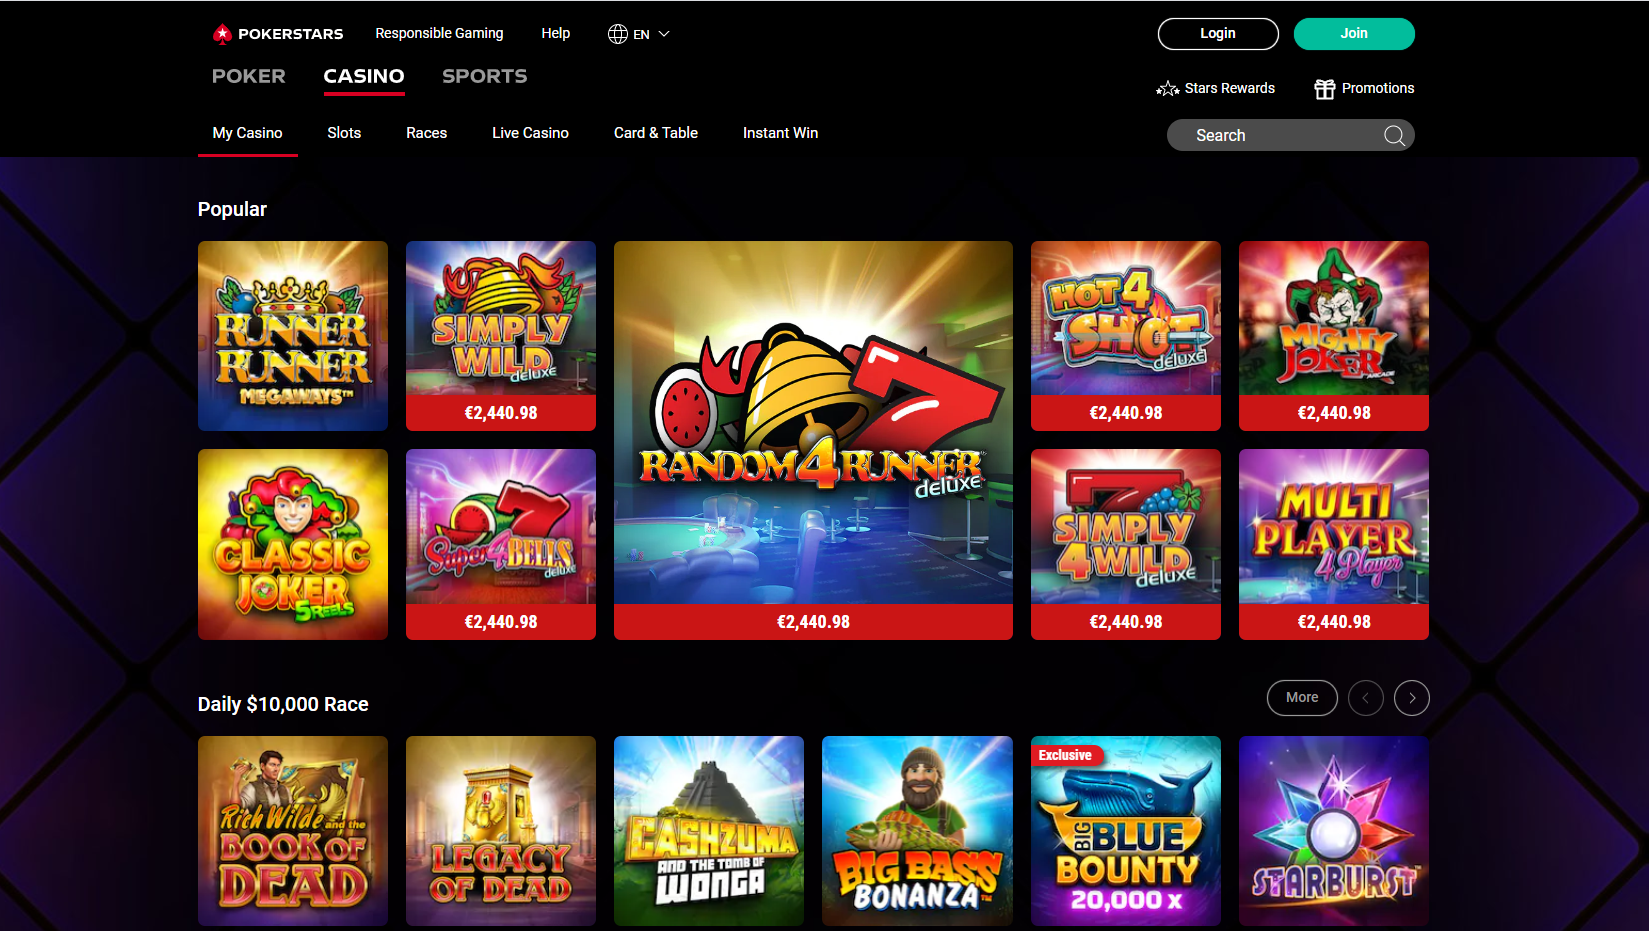 How To Find The Time To online casino On Google in 2021